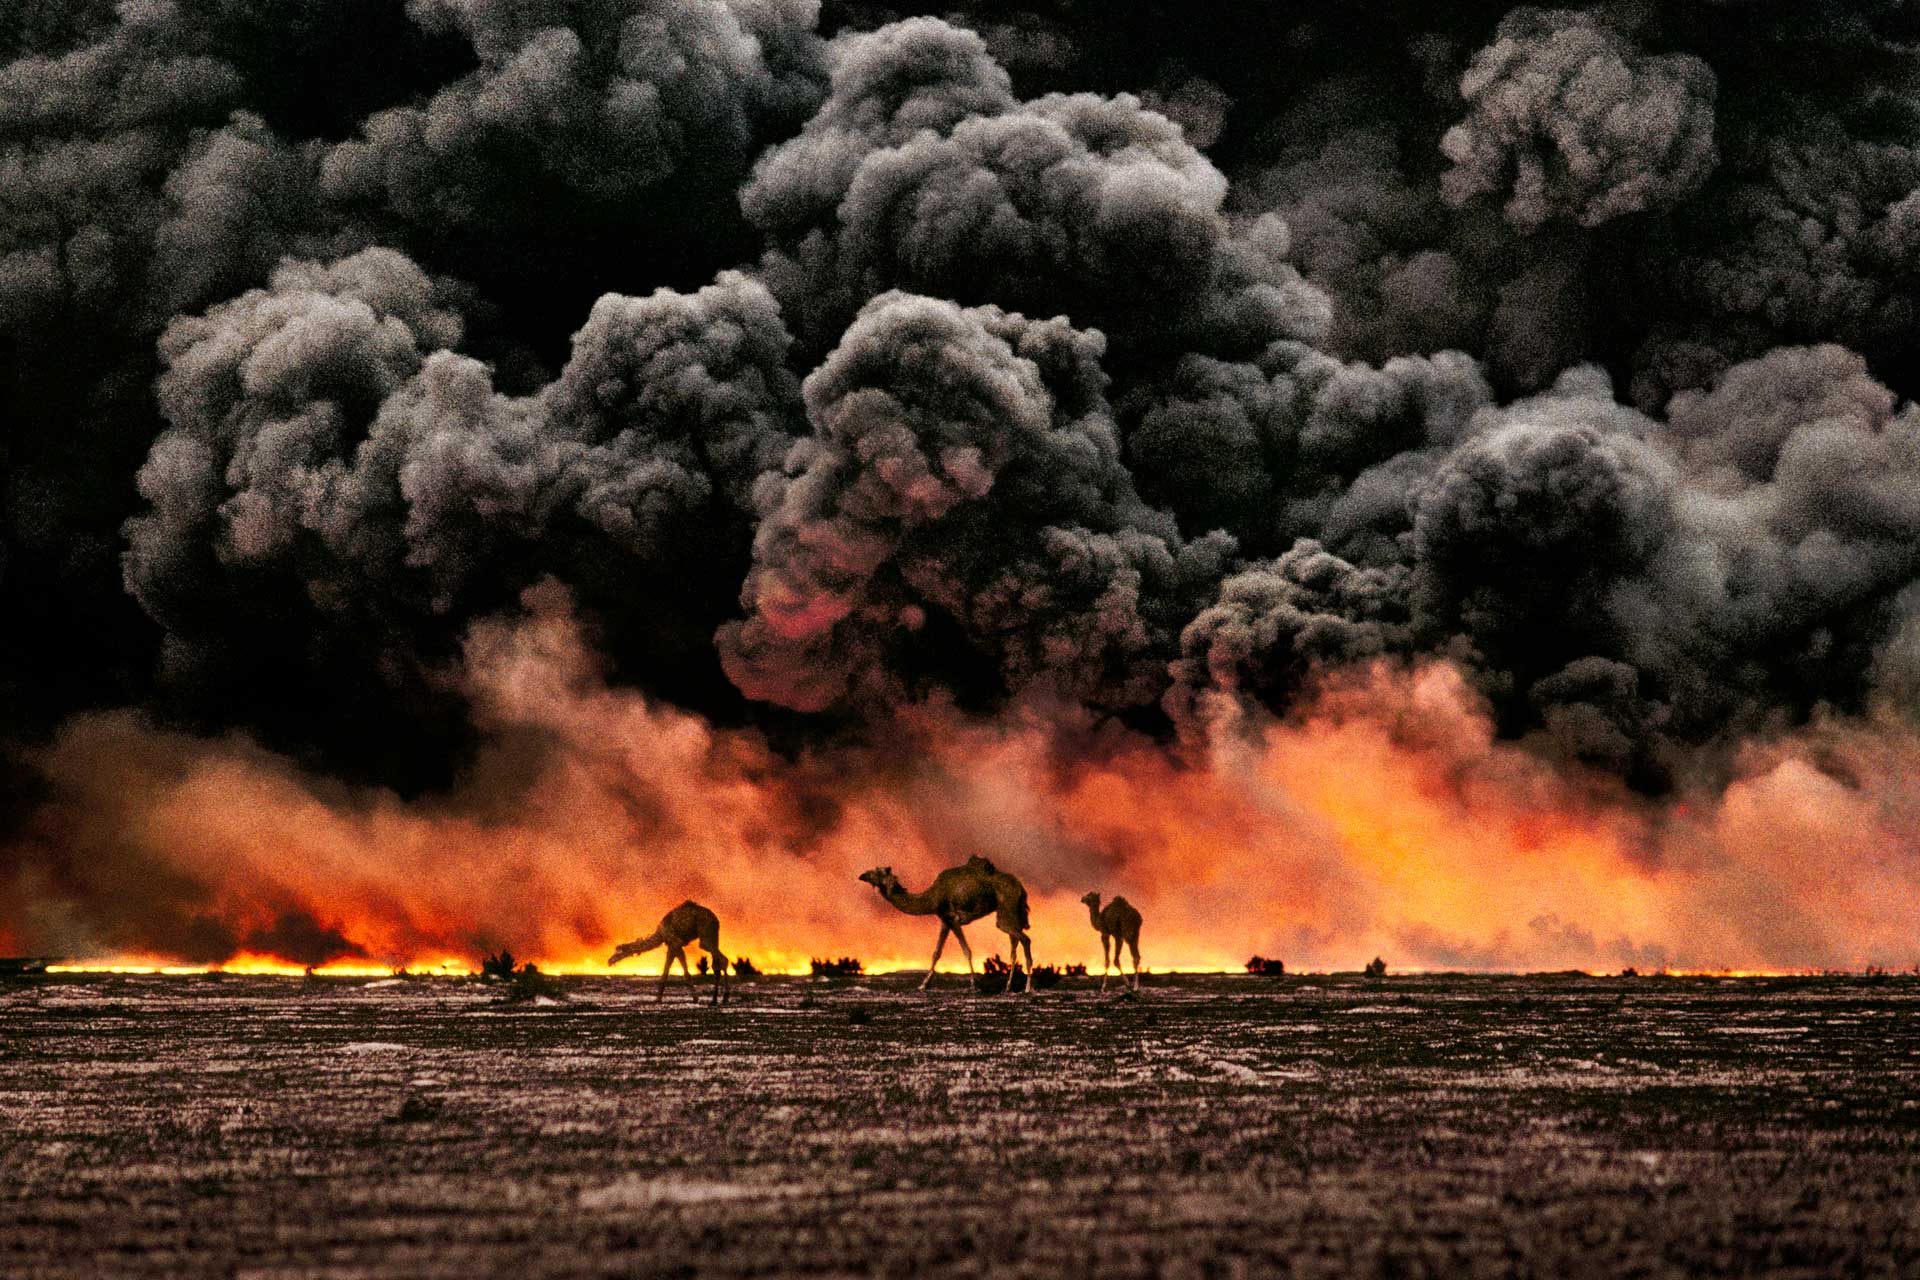 camels search for untainted shrubs and water in the burning oil fields of southern Kuwait